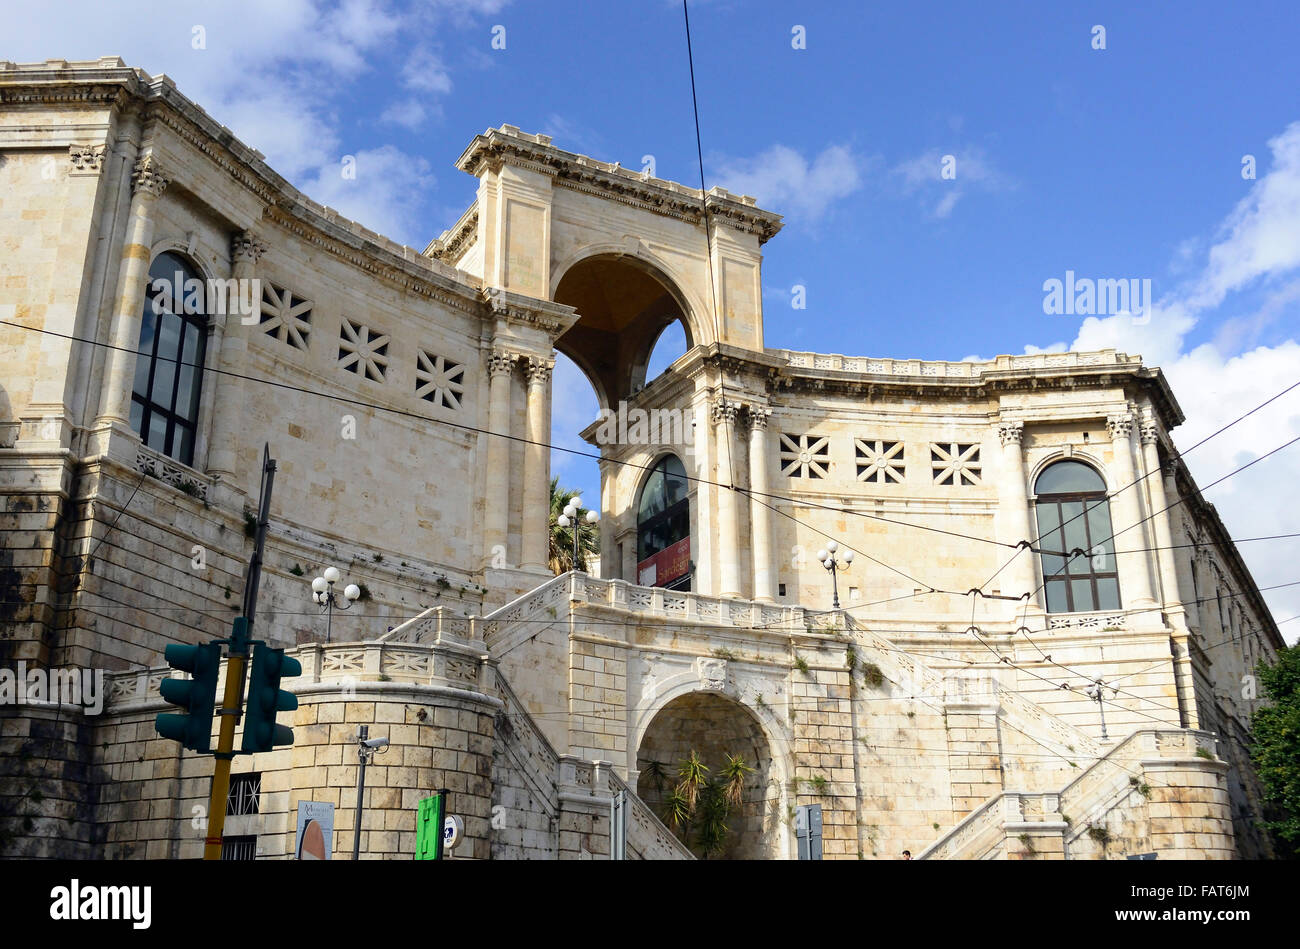 a view on Bastione St Remy Cagliari Sardinia Italy Stock Photo